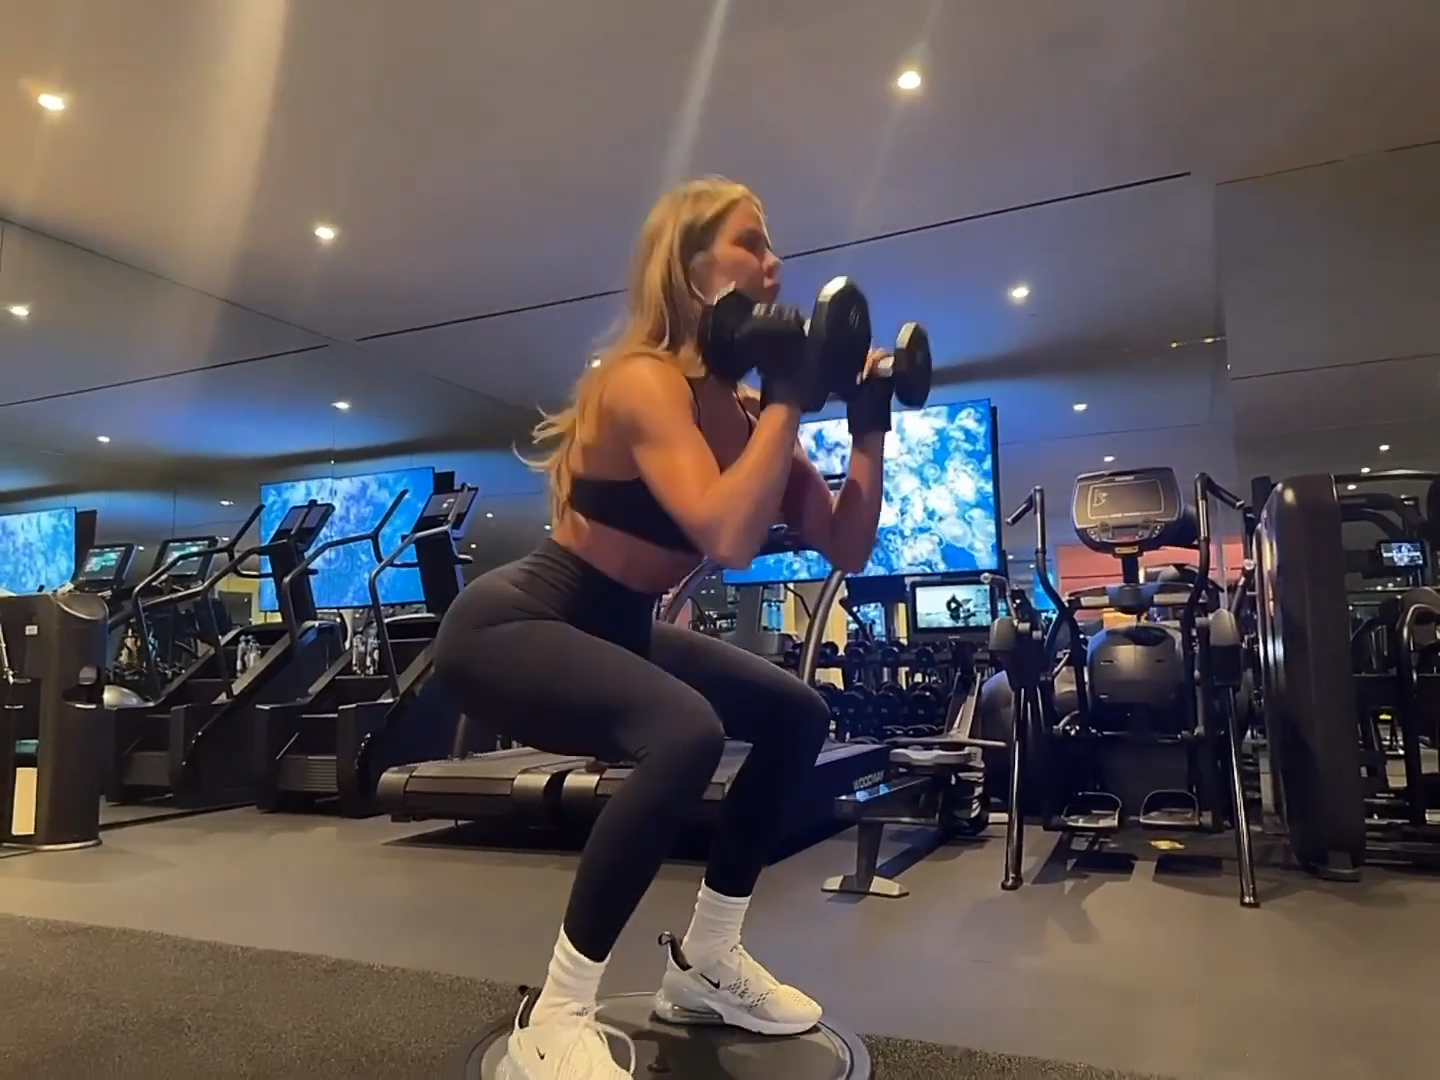 Fans recently commented on the shape of Khloe's butt during a workout